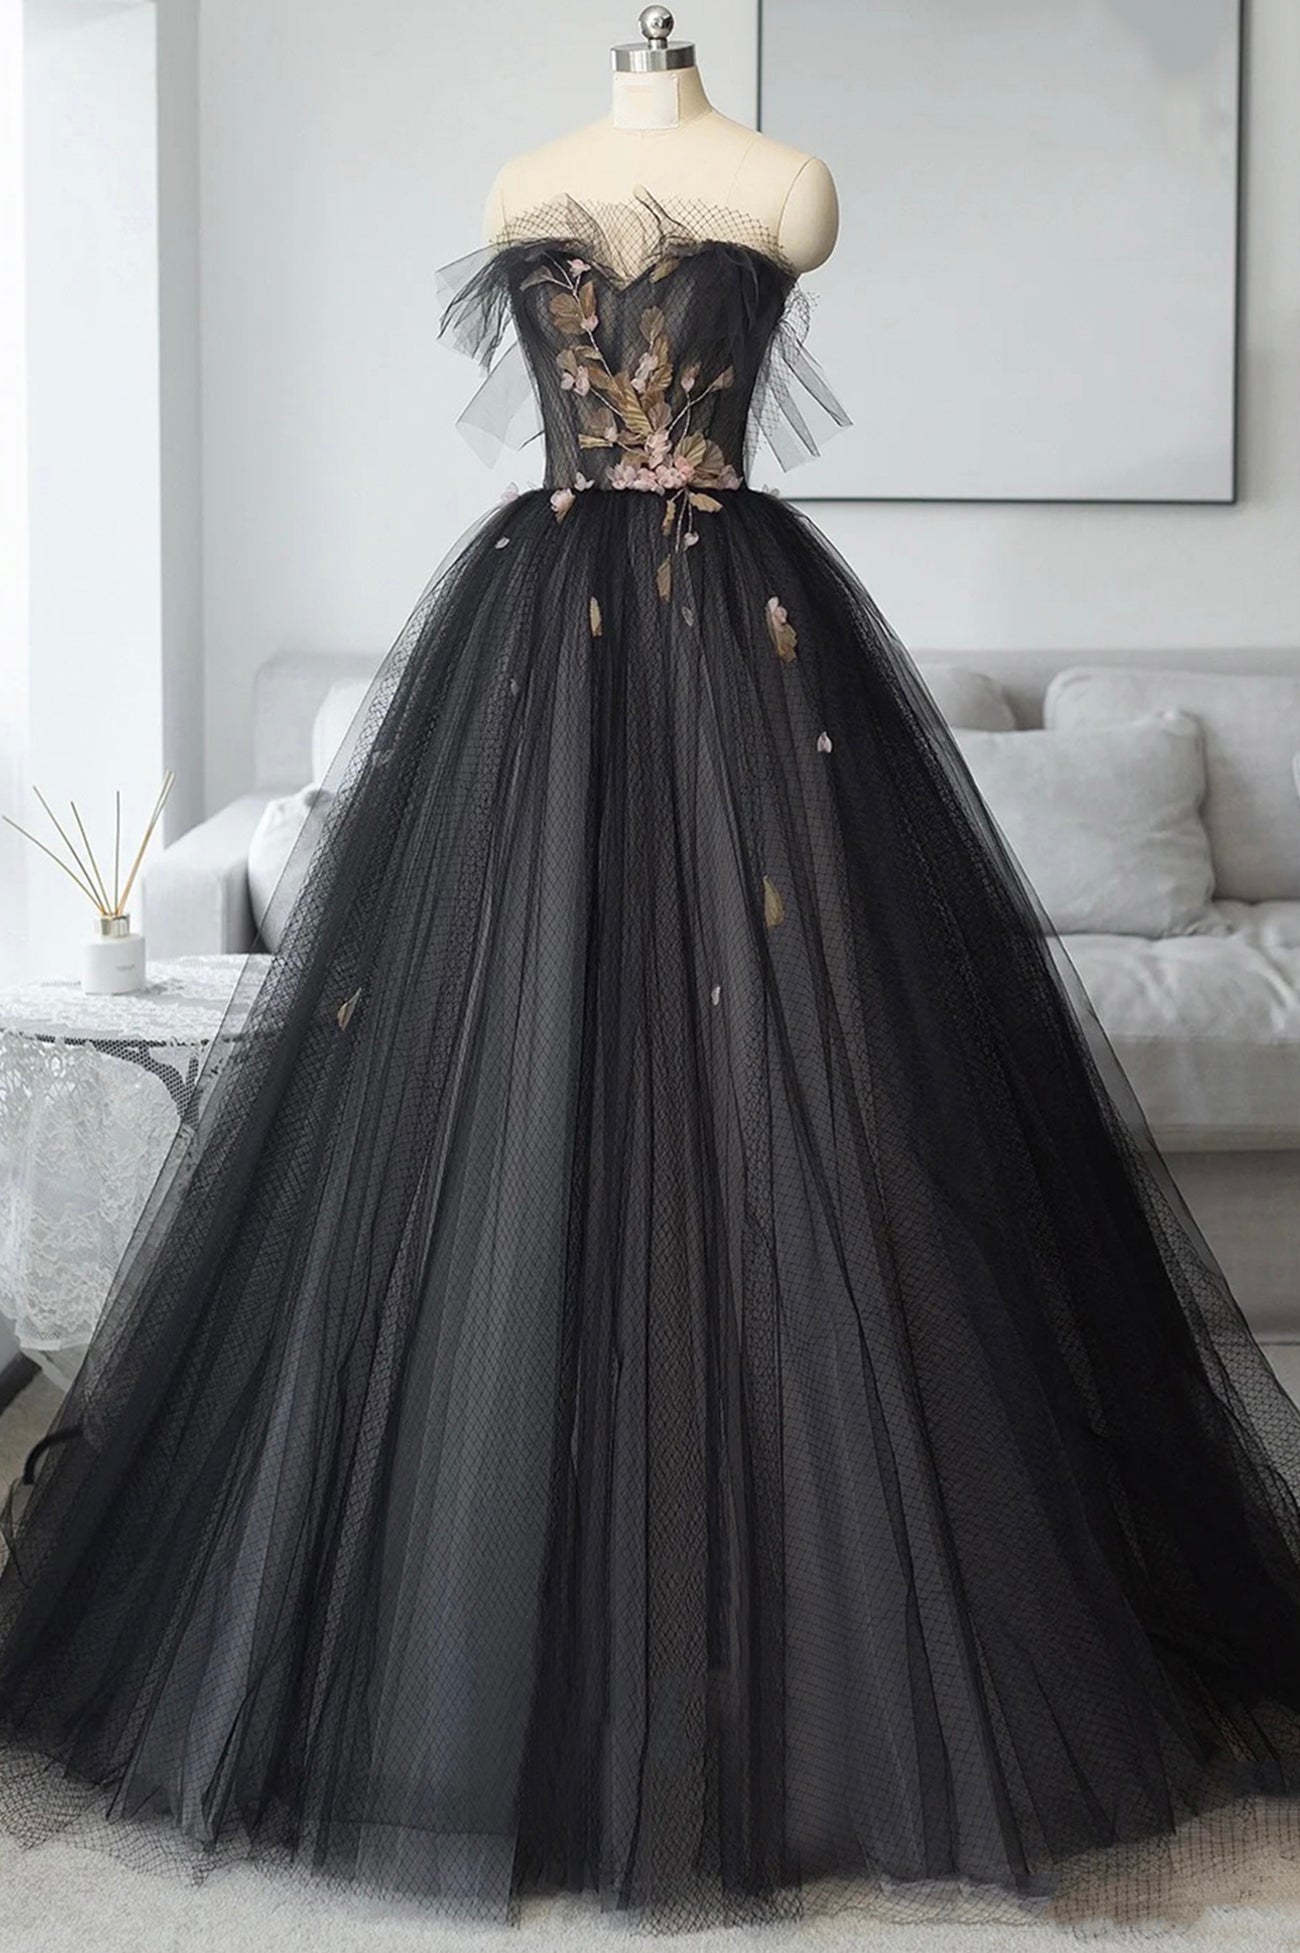 Black Tulle Long Prom Dress Outfits For Girls, Black A-Line Strapless Evening Dress